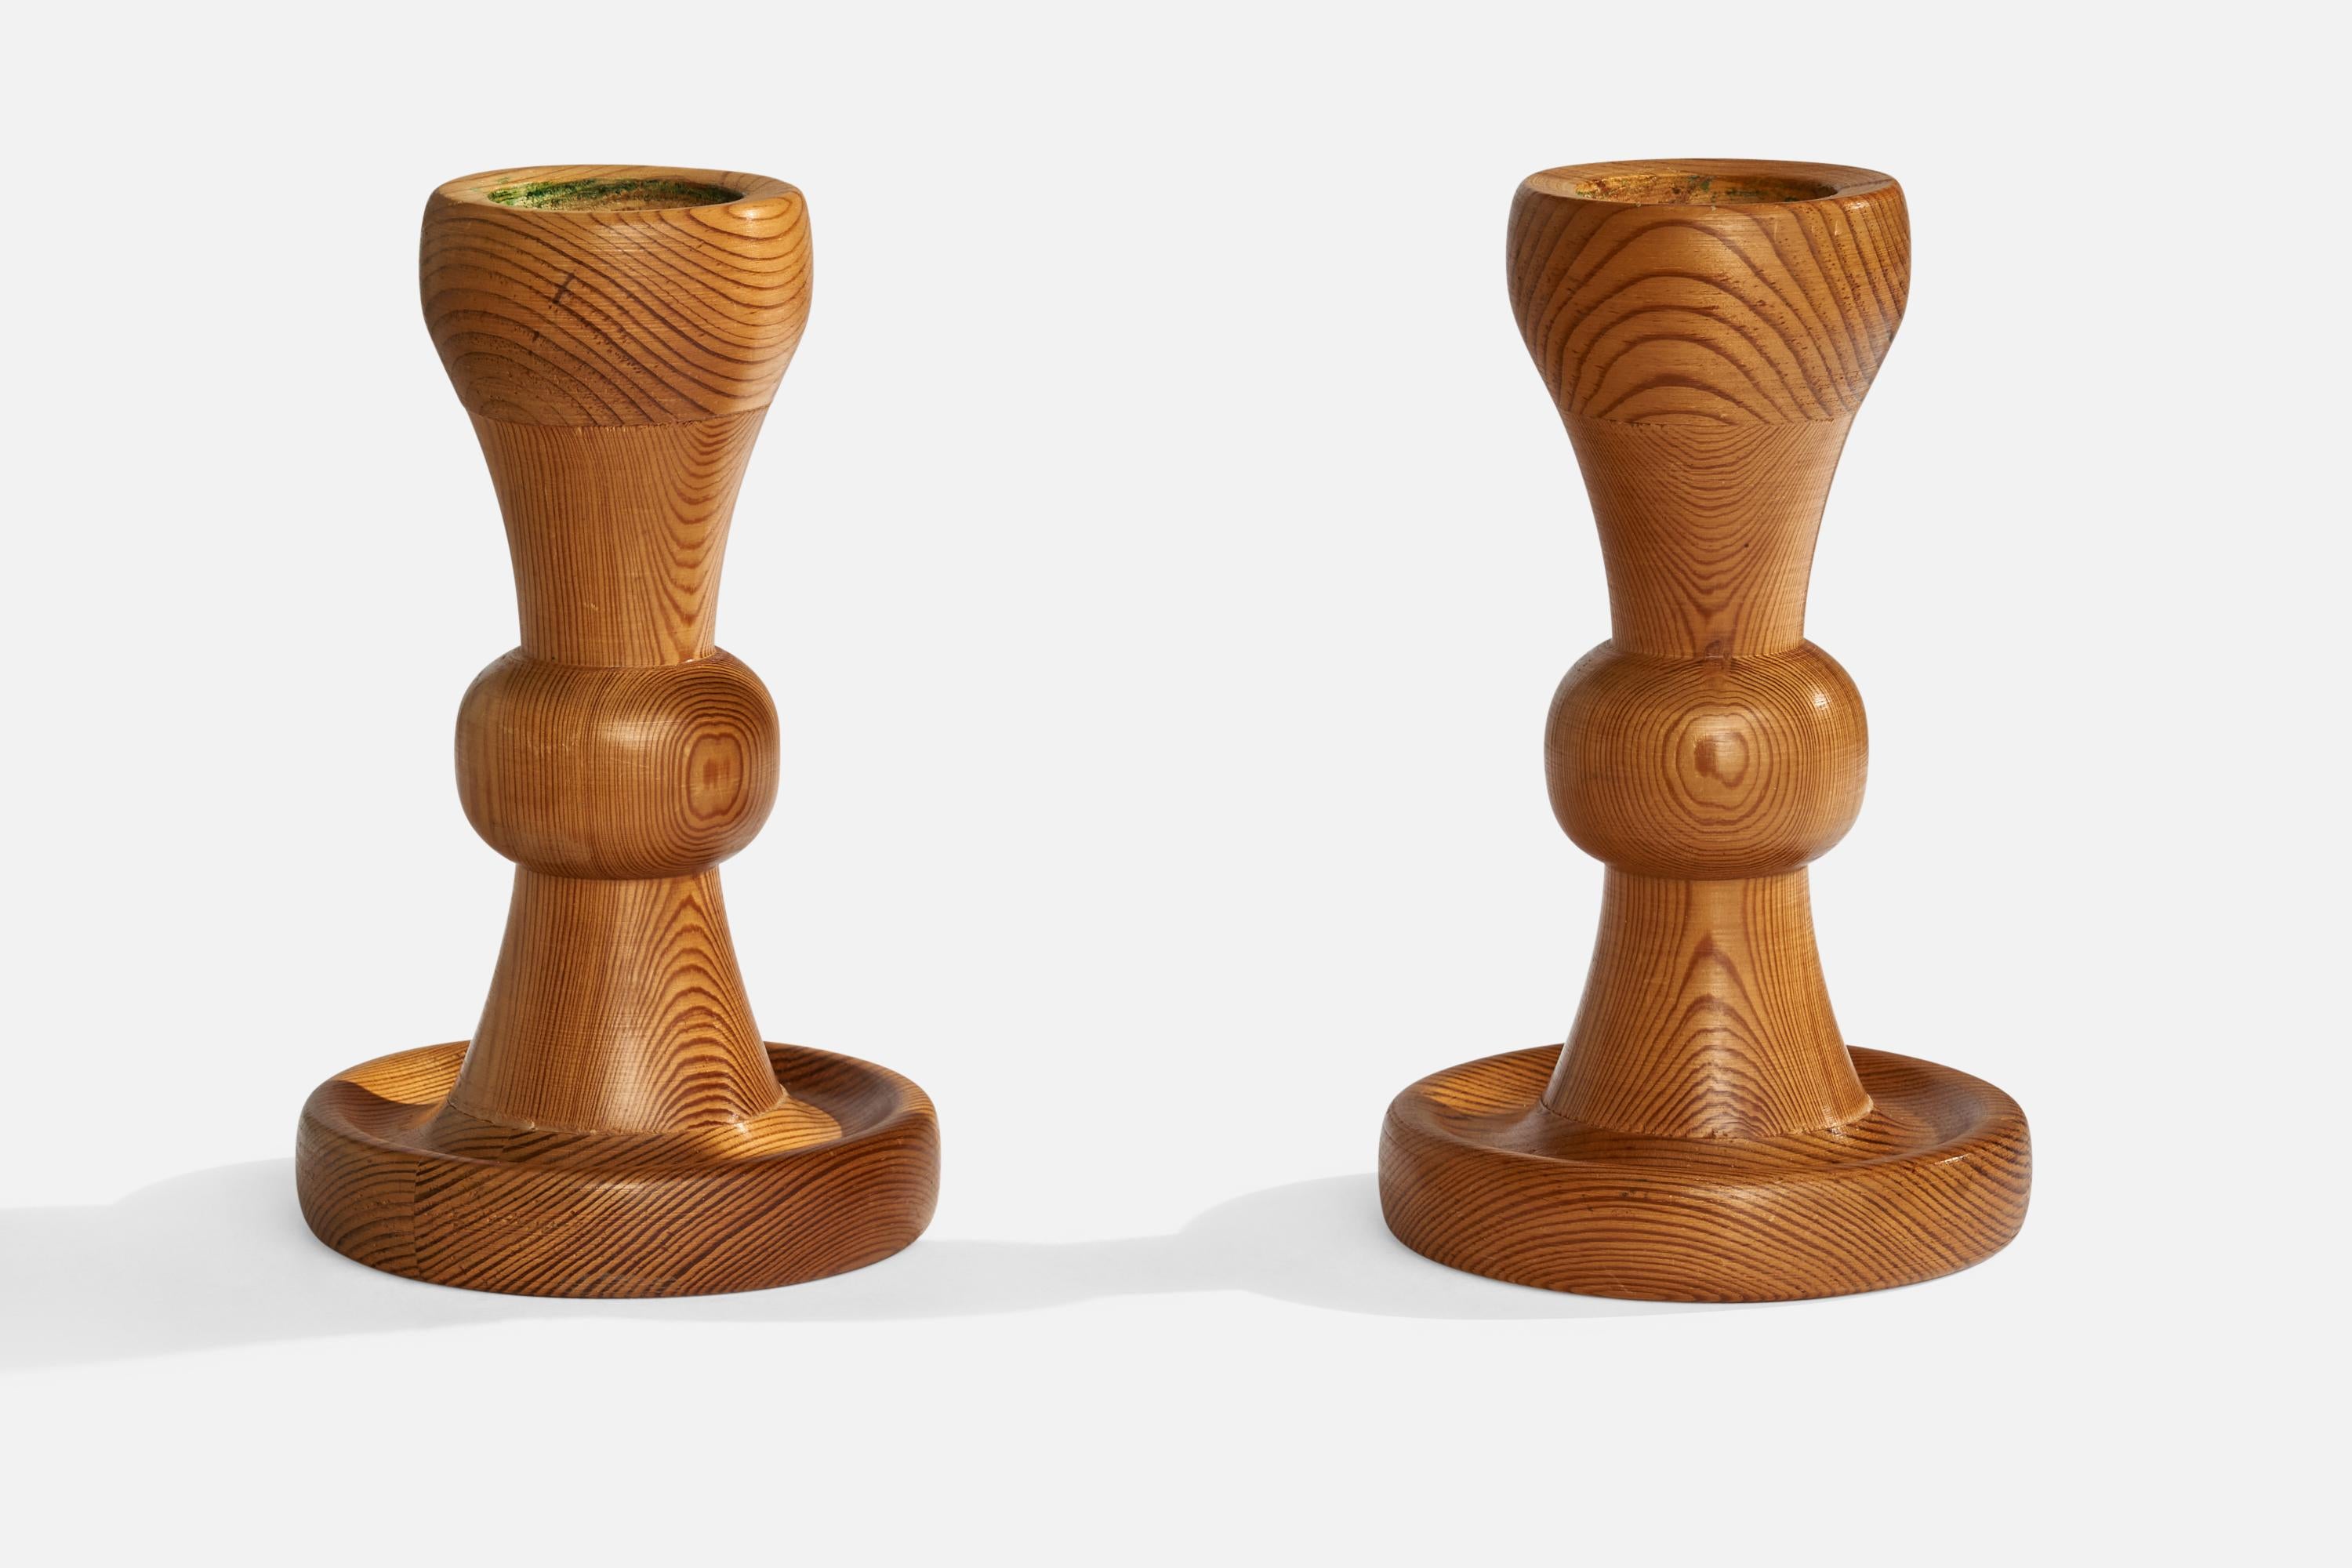 A pair of pine candlesticks designed and produced in Sweden, 1970s.

Holds 2.0” diameter candles